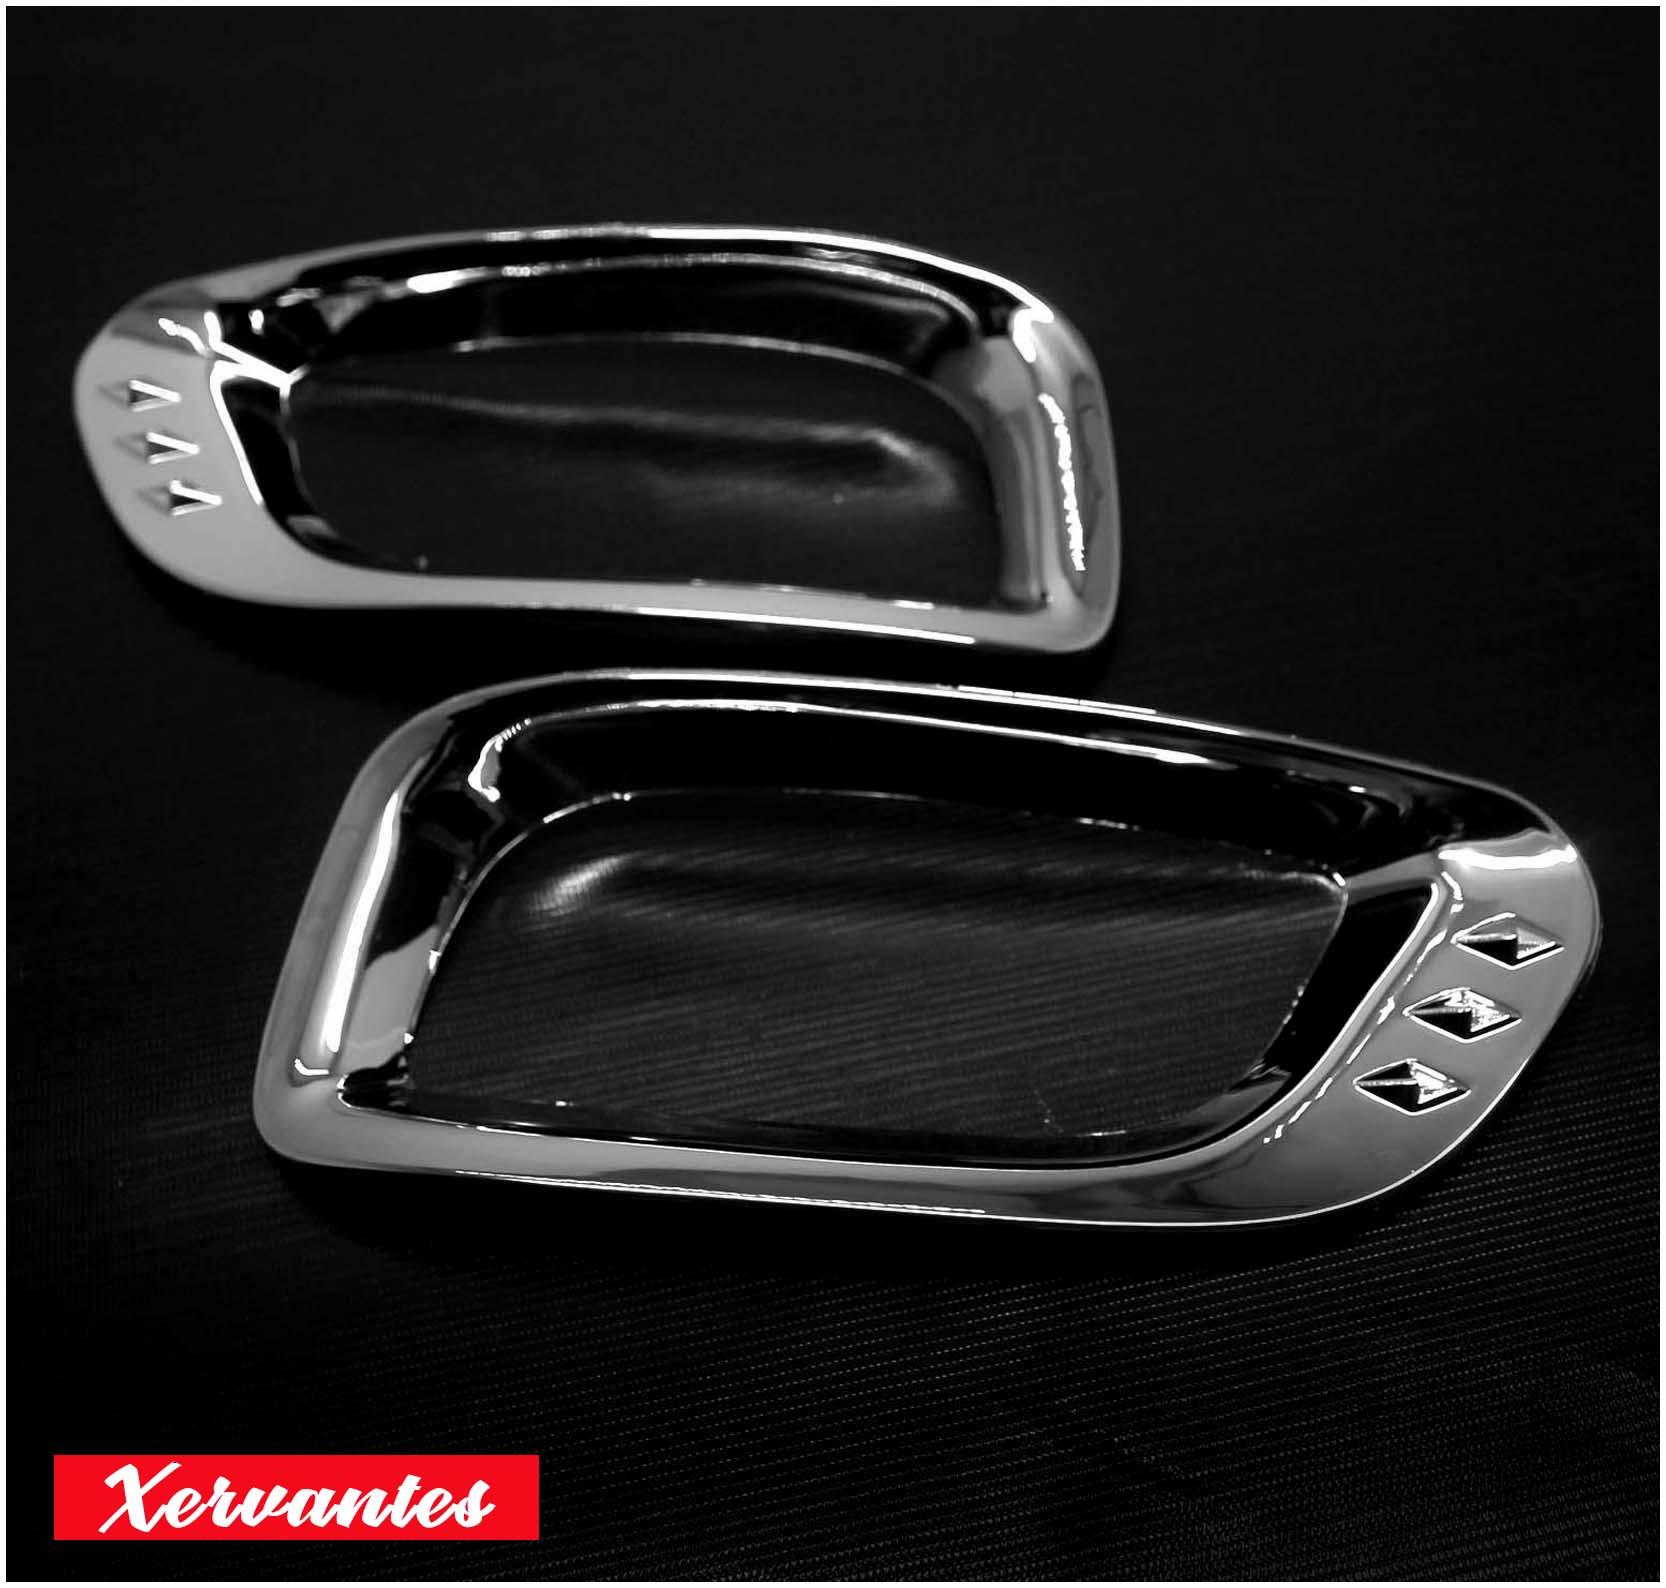 Taillight Covers For Toyota Corolla 2009-2010 Accessories Chrome Headlight